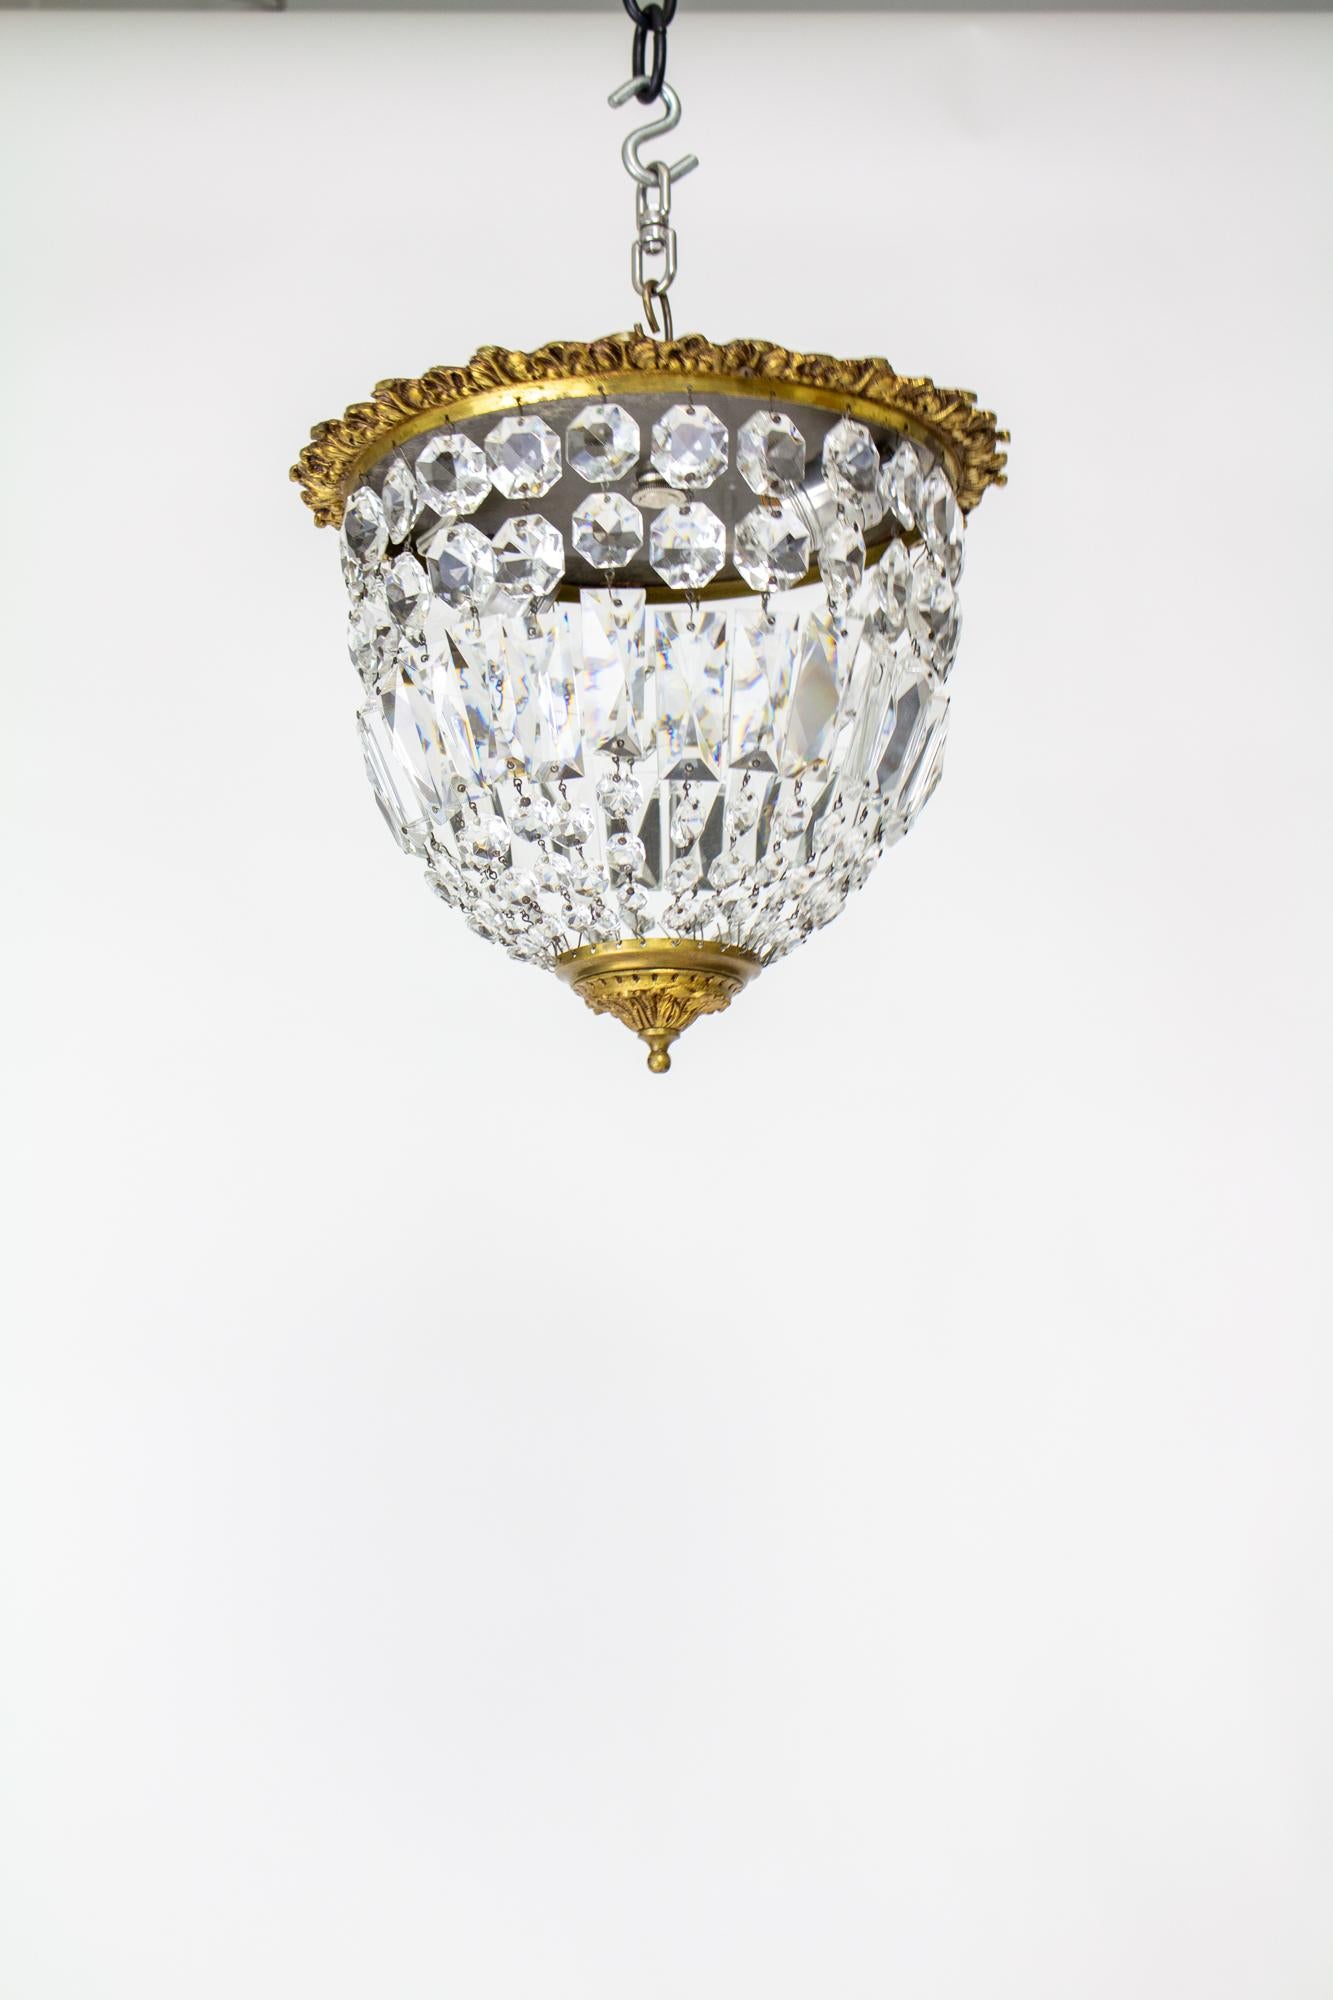 American Mid 20th Century Brass and Crystal Basket Flush Mount Fixture For Sale